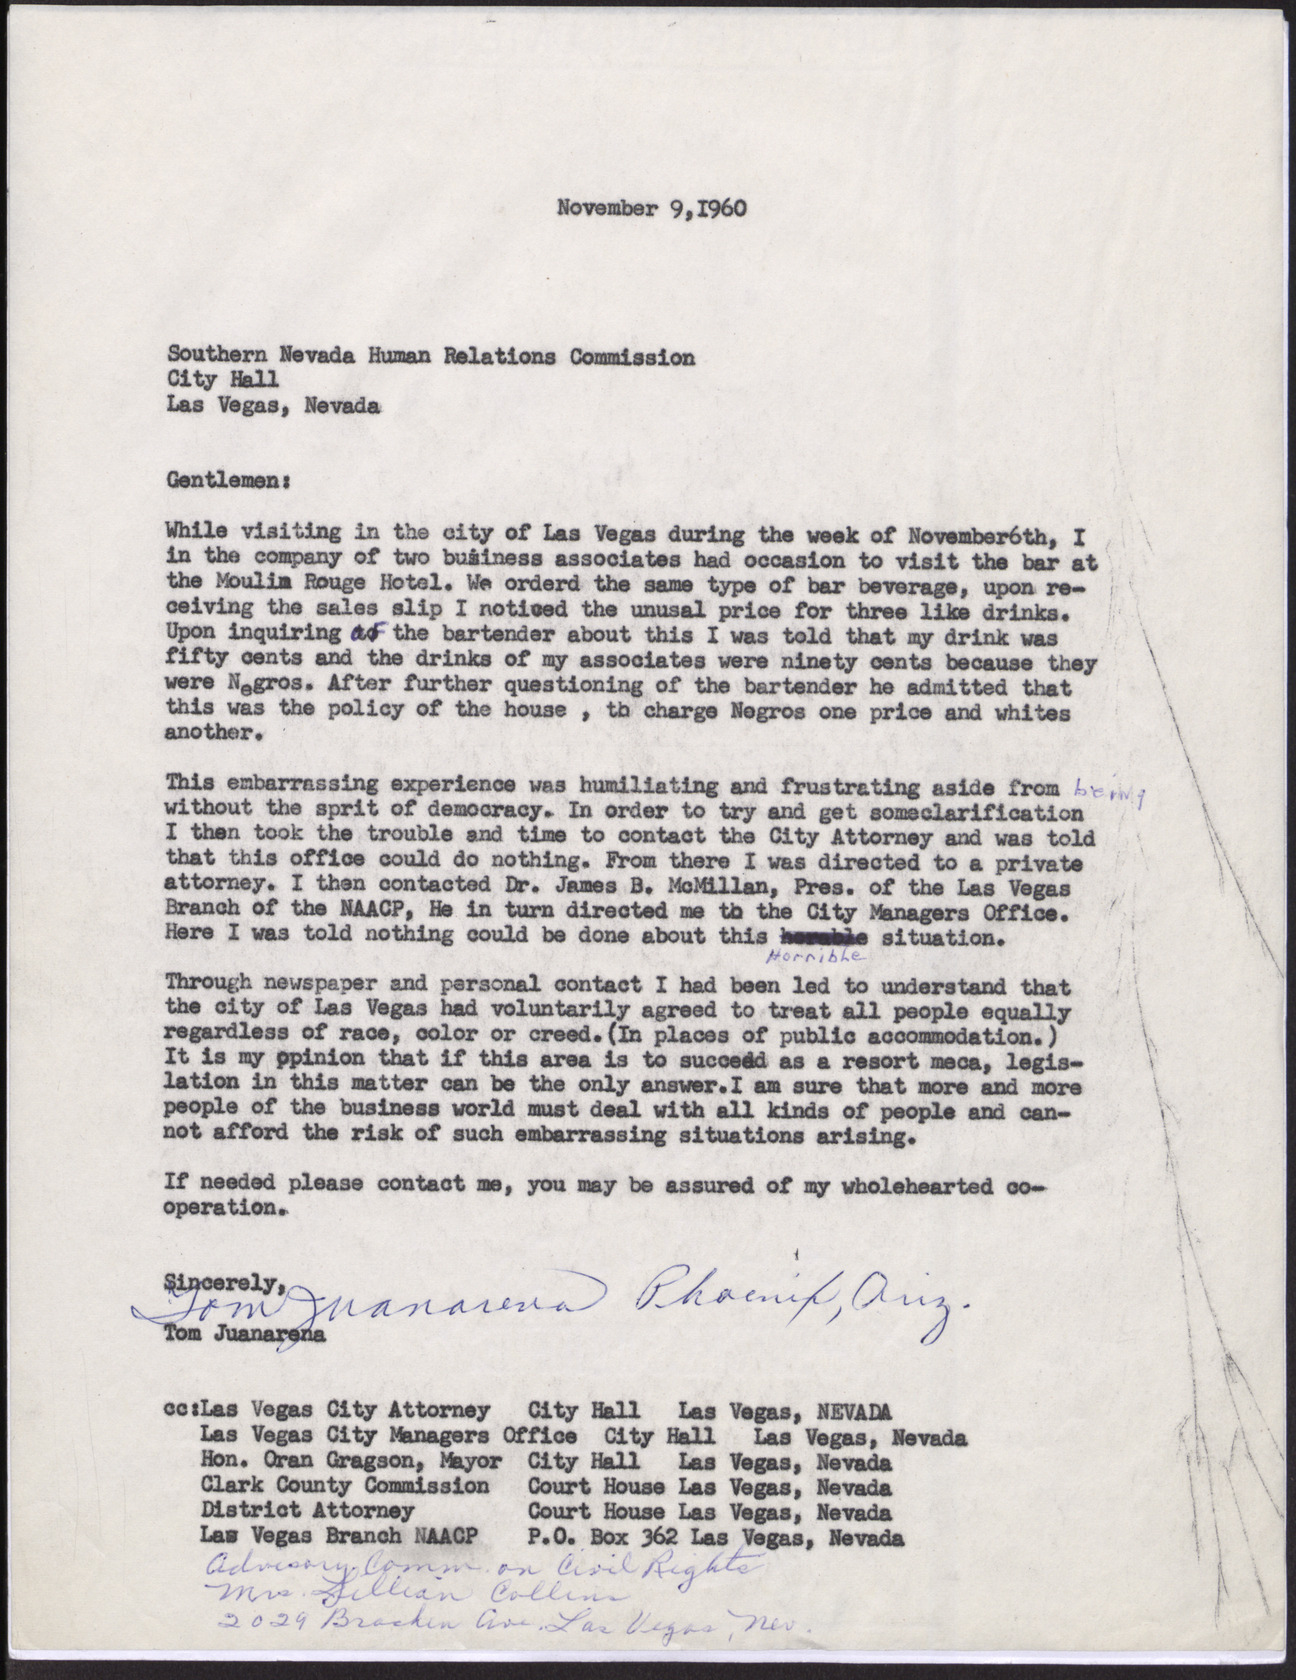 Letter to the Southern Nevada Human Relations Commission from Tom Juanarena, November 9, 1960